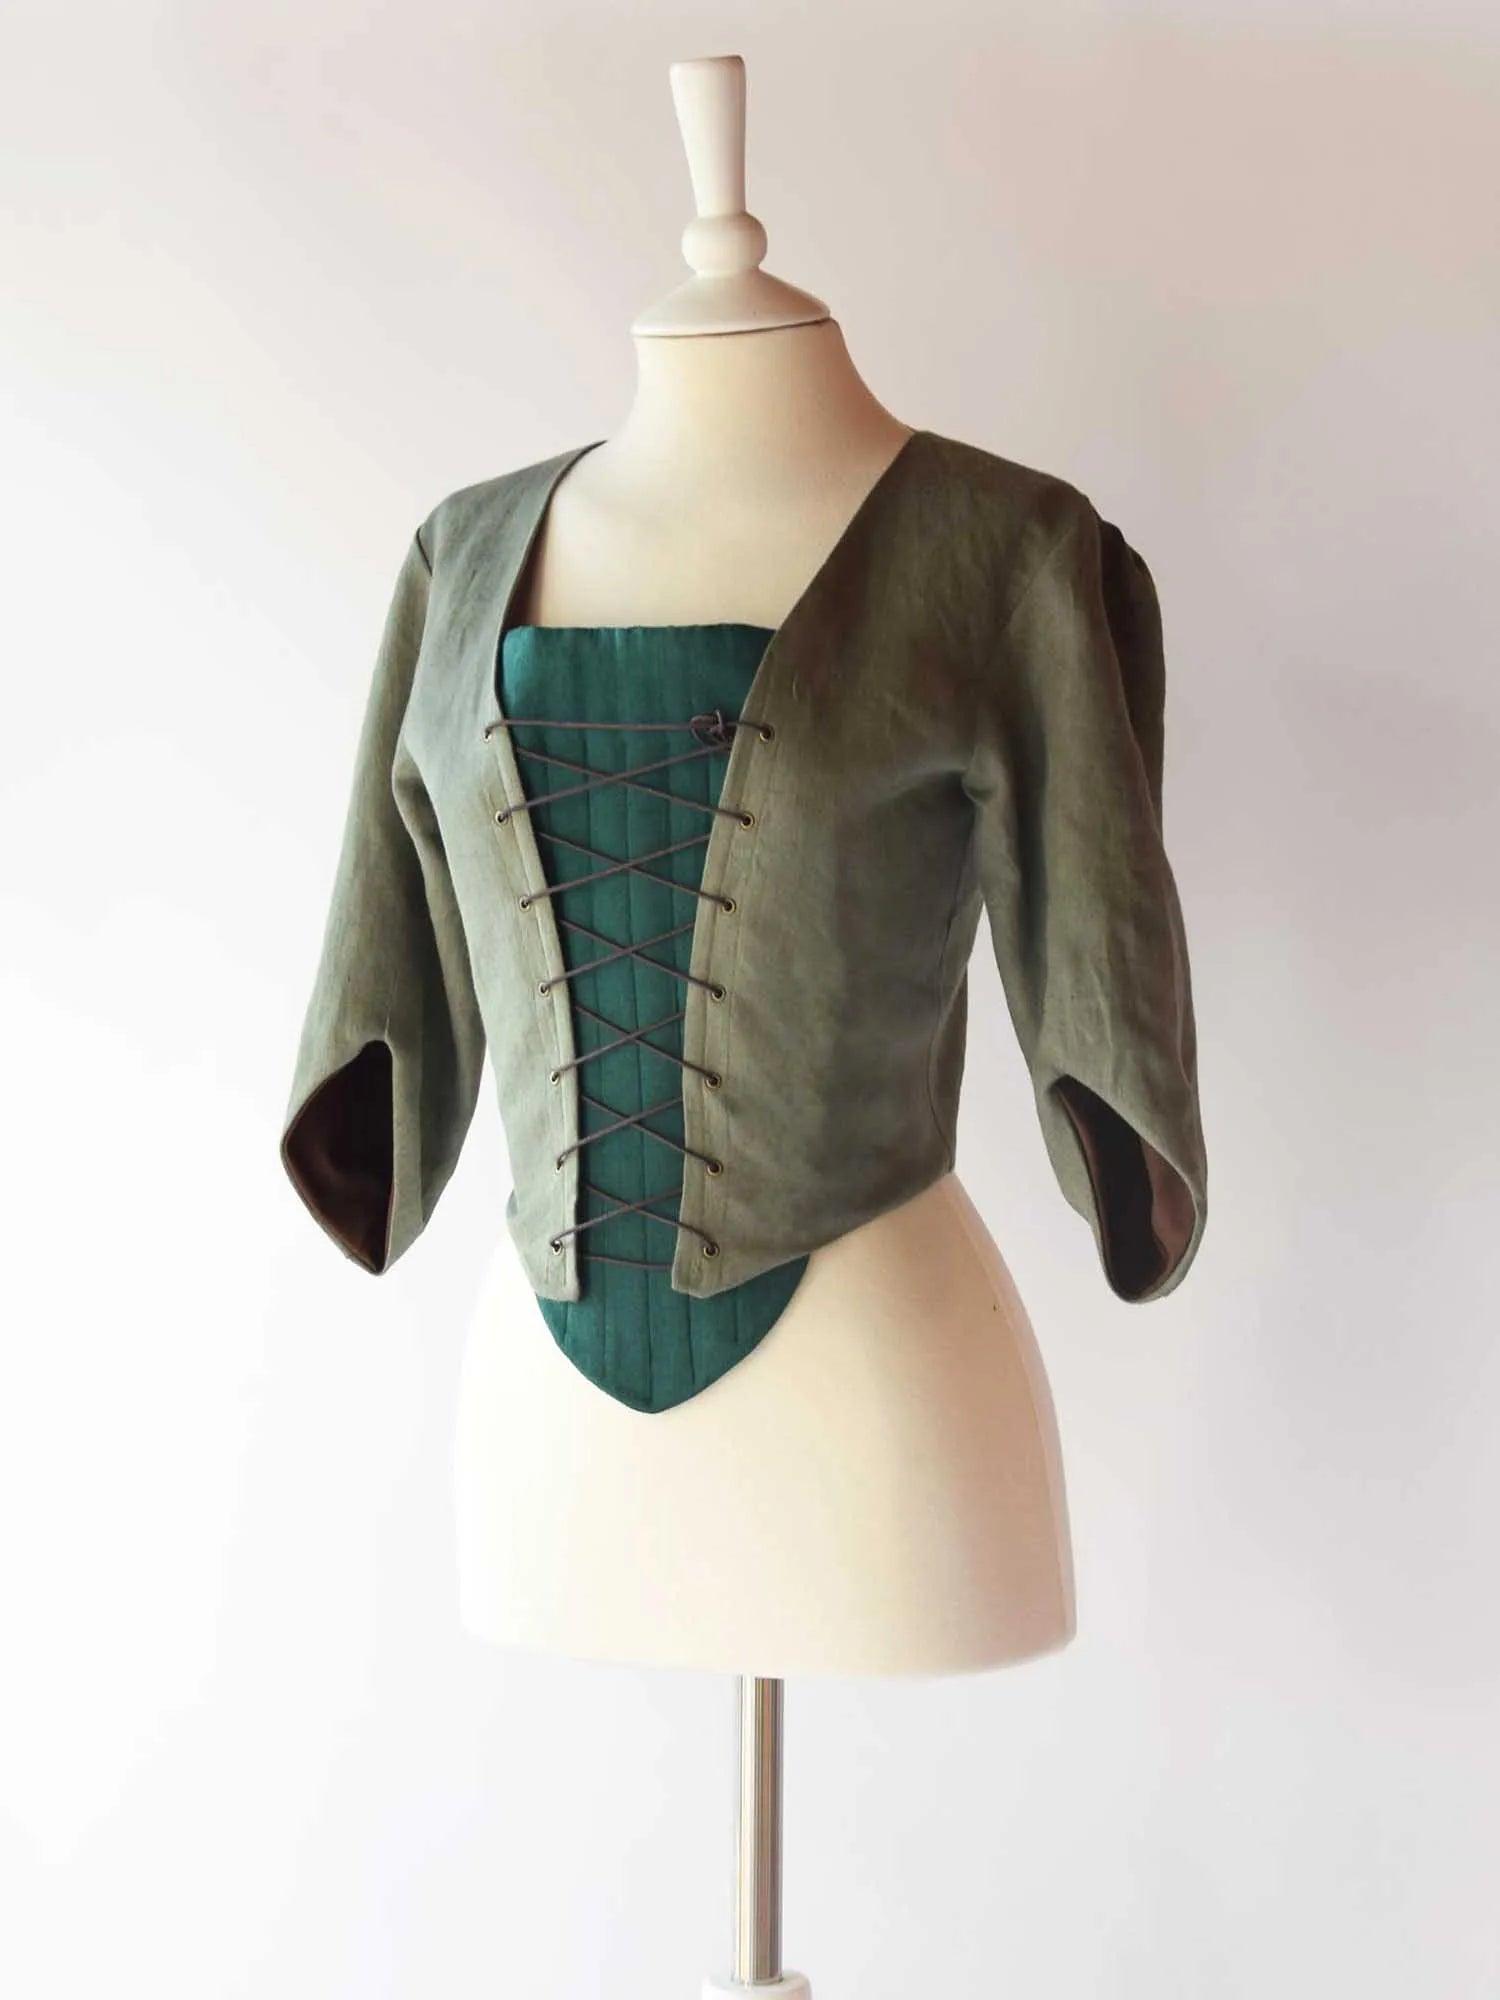 Lace-Up Bodice in Sage Green Linen - Atelier Serraspina